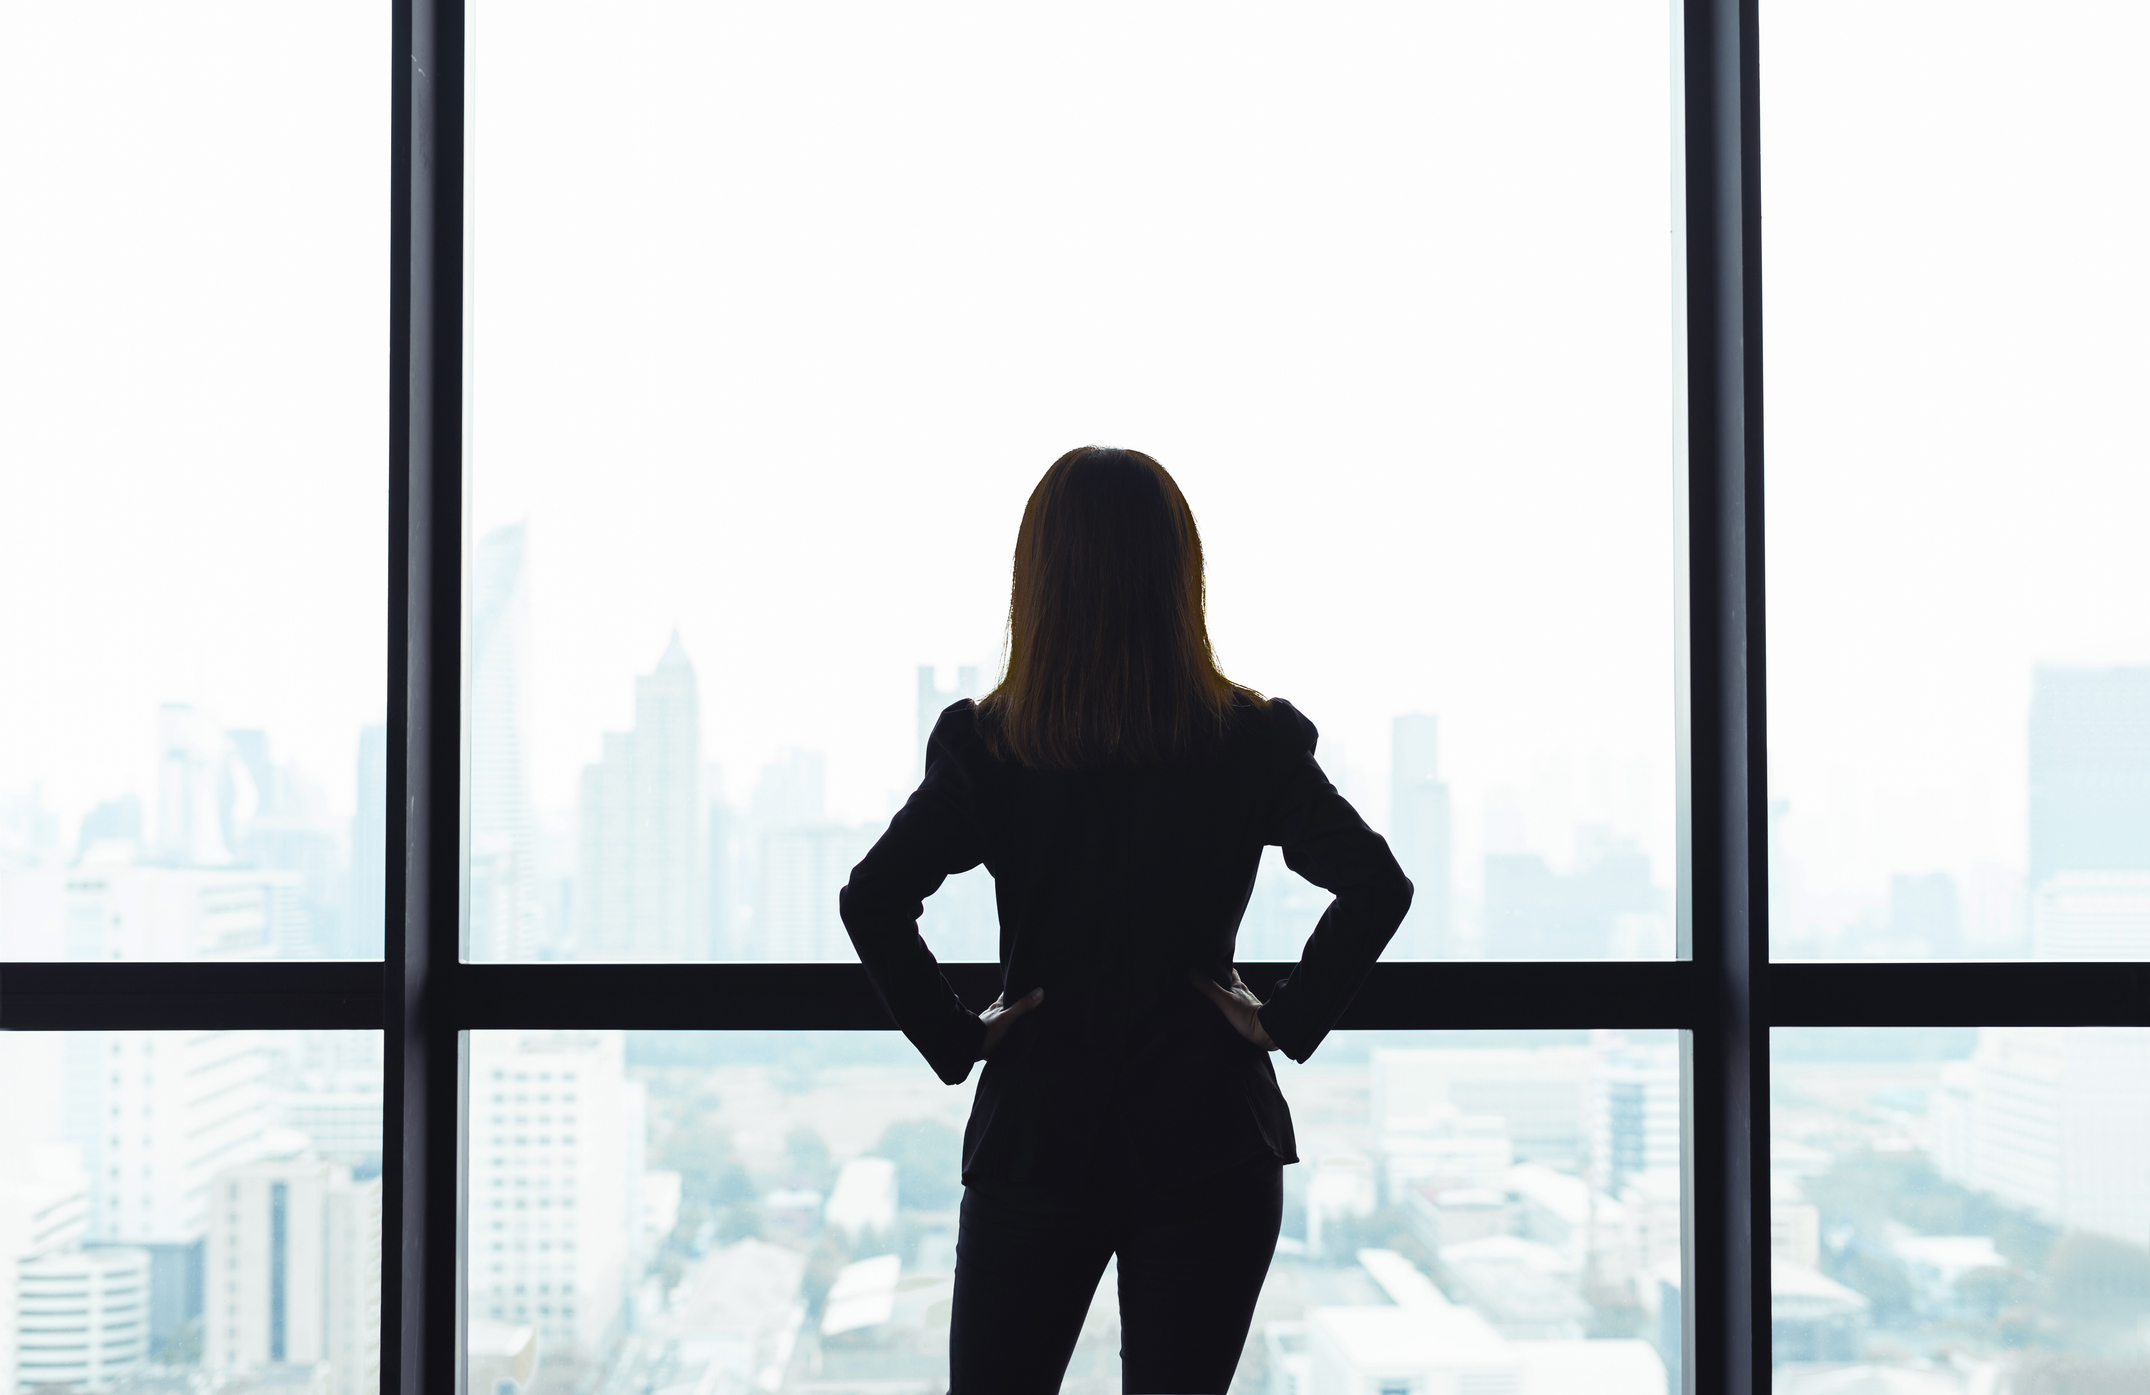 Female Ceos Face Greater Penalties Than Male Ceos For Ethical Transgressions